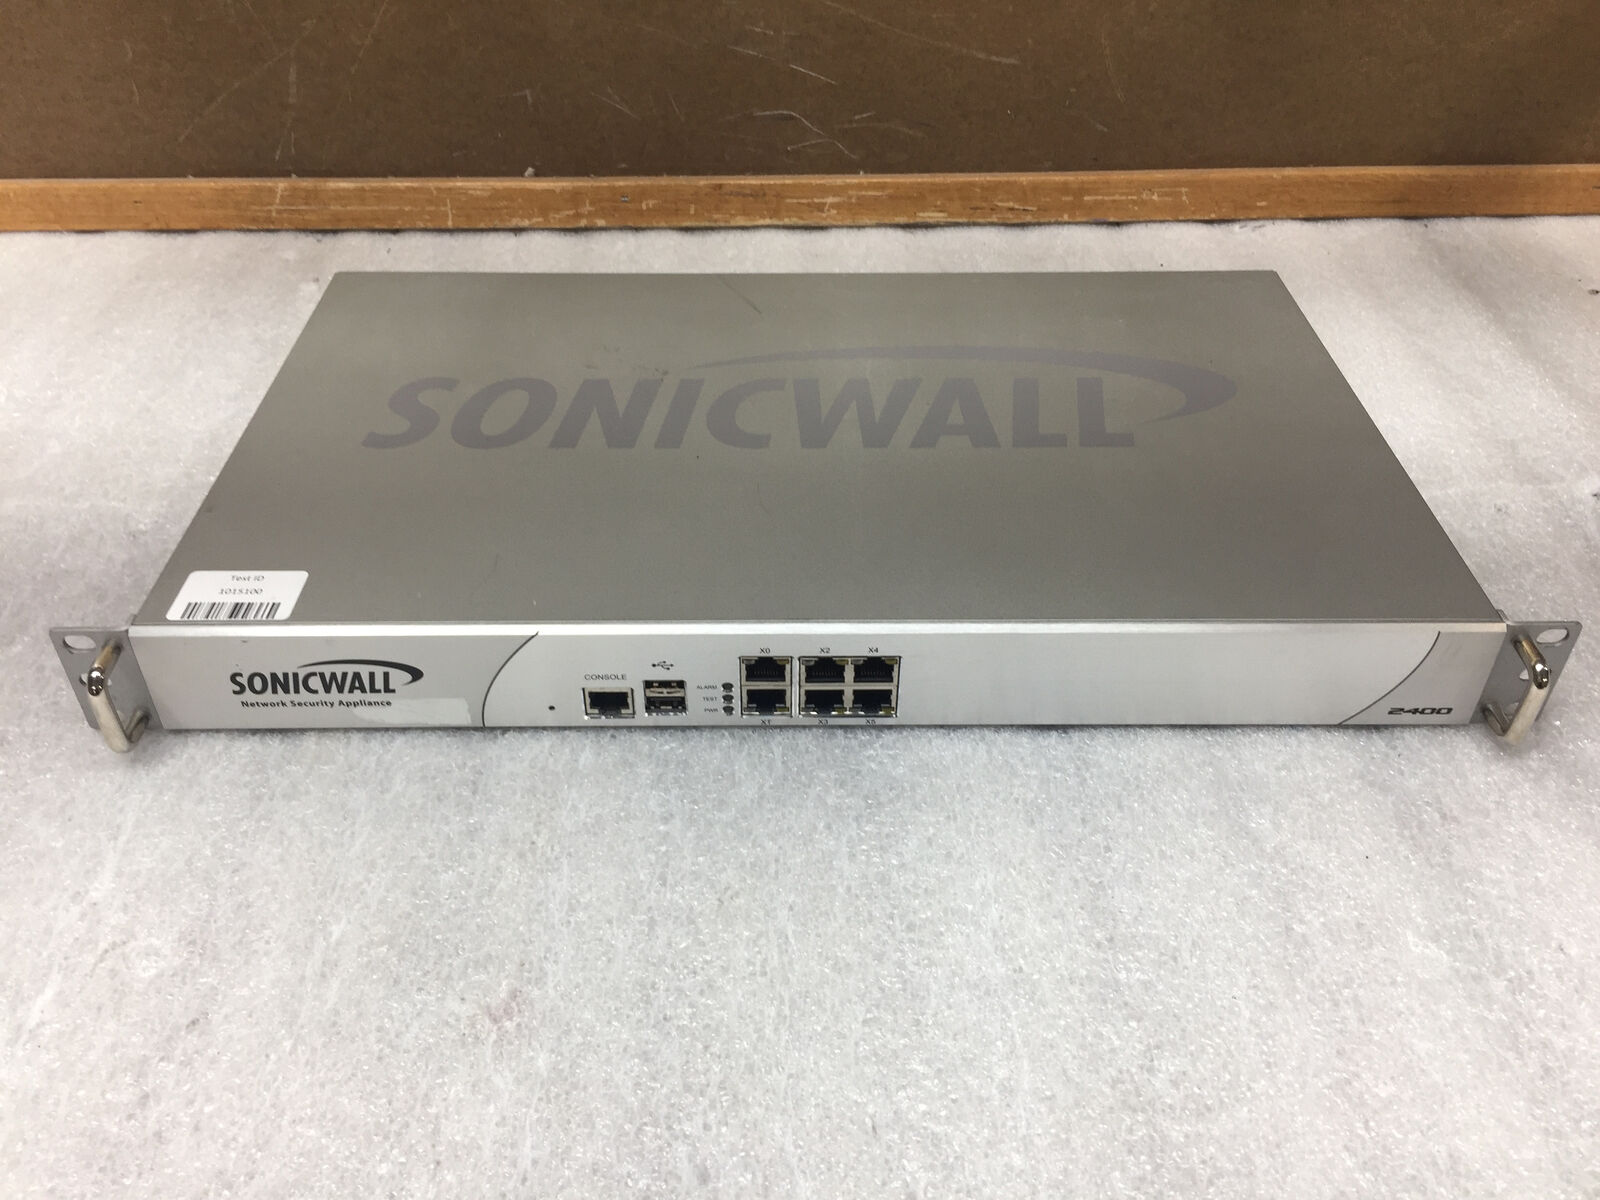 SonicWALL NSA 2400 Rack Mountable Network Security Firewall Appliance, Reset